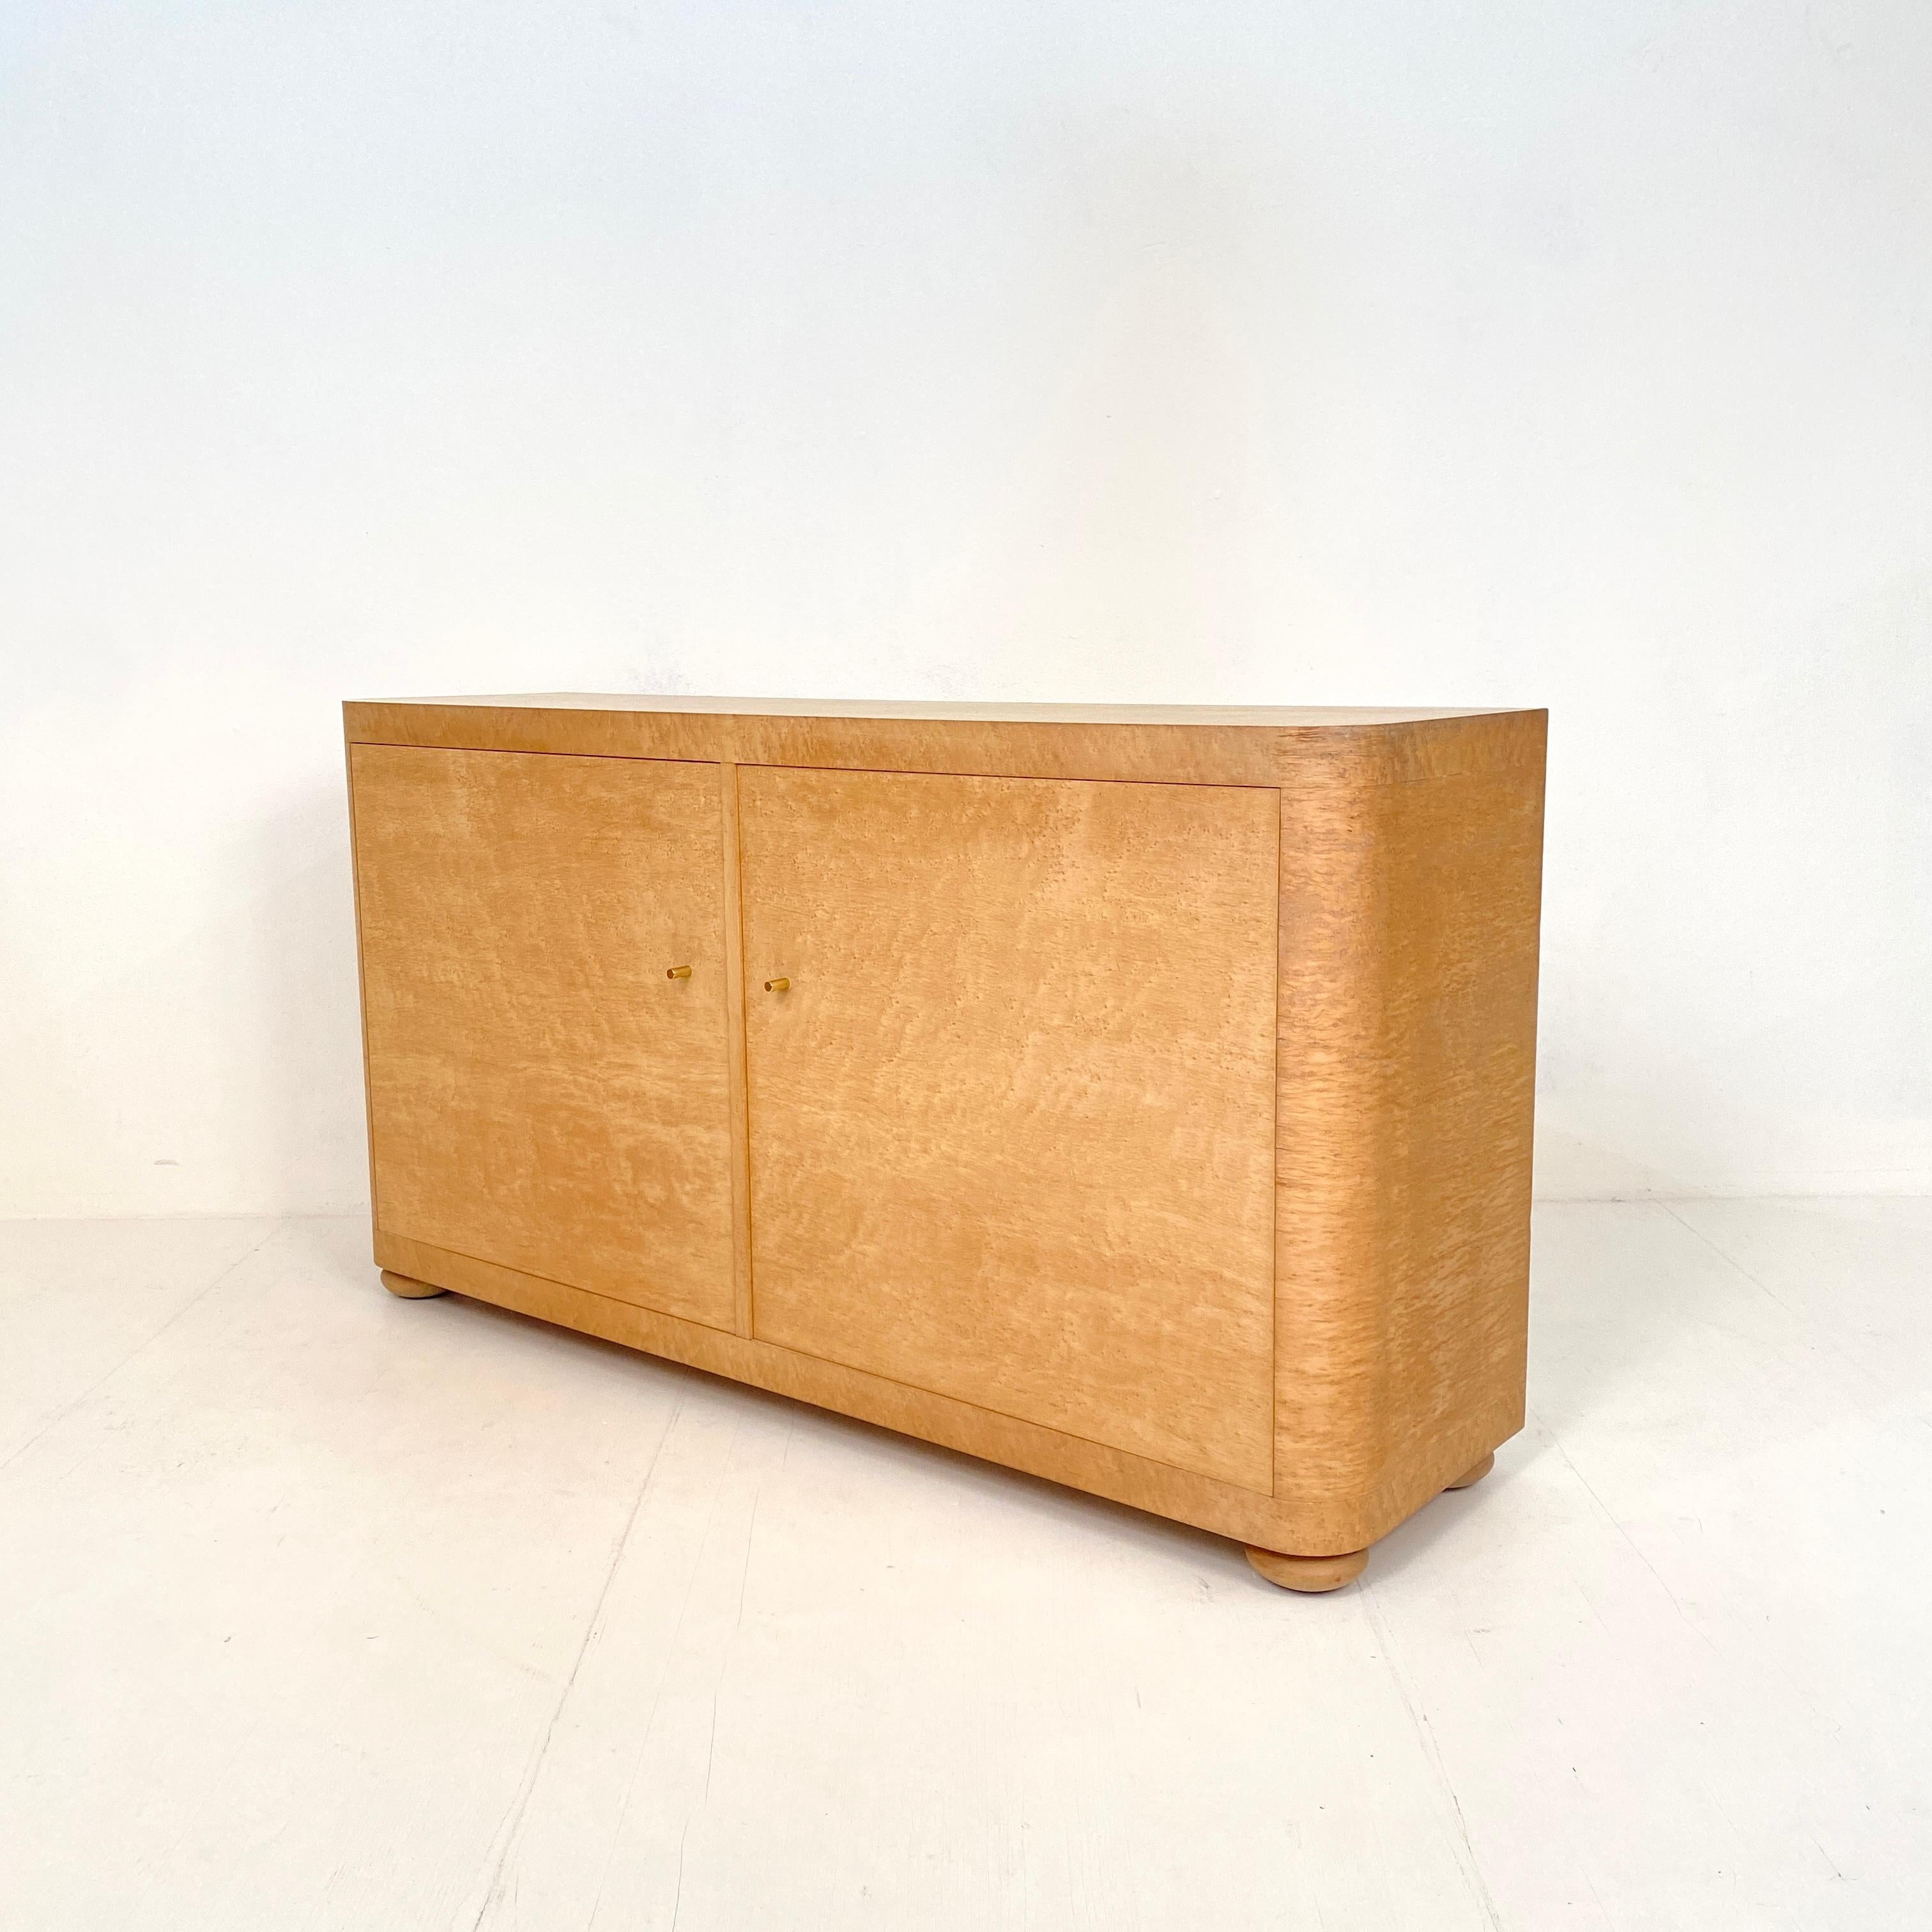 This midcentury Italian sideboard in bird's-eye maple was made, circa 1975.
It is attributed to the Italian manufacturer Saporiti.
It is in fantastic vintage condition and from amazing quality.
A unique piece which is a great eyecatcher for your